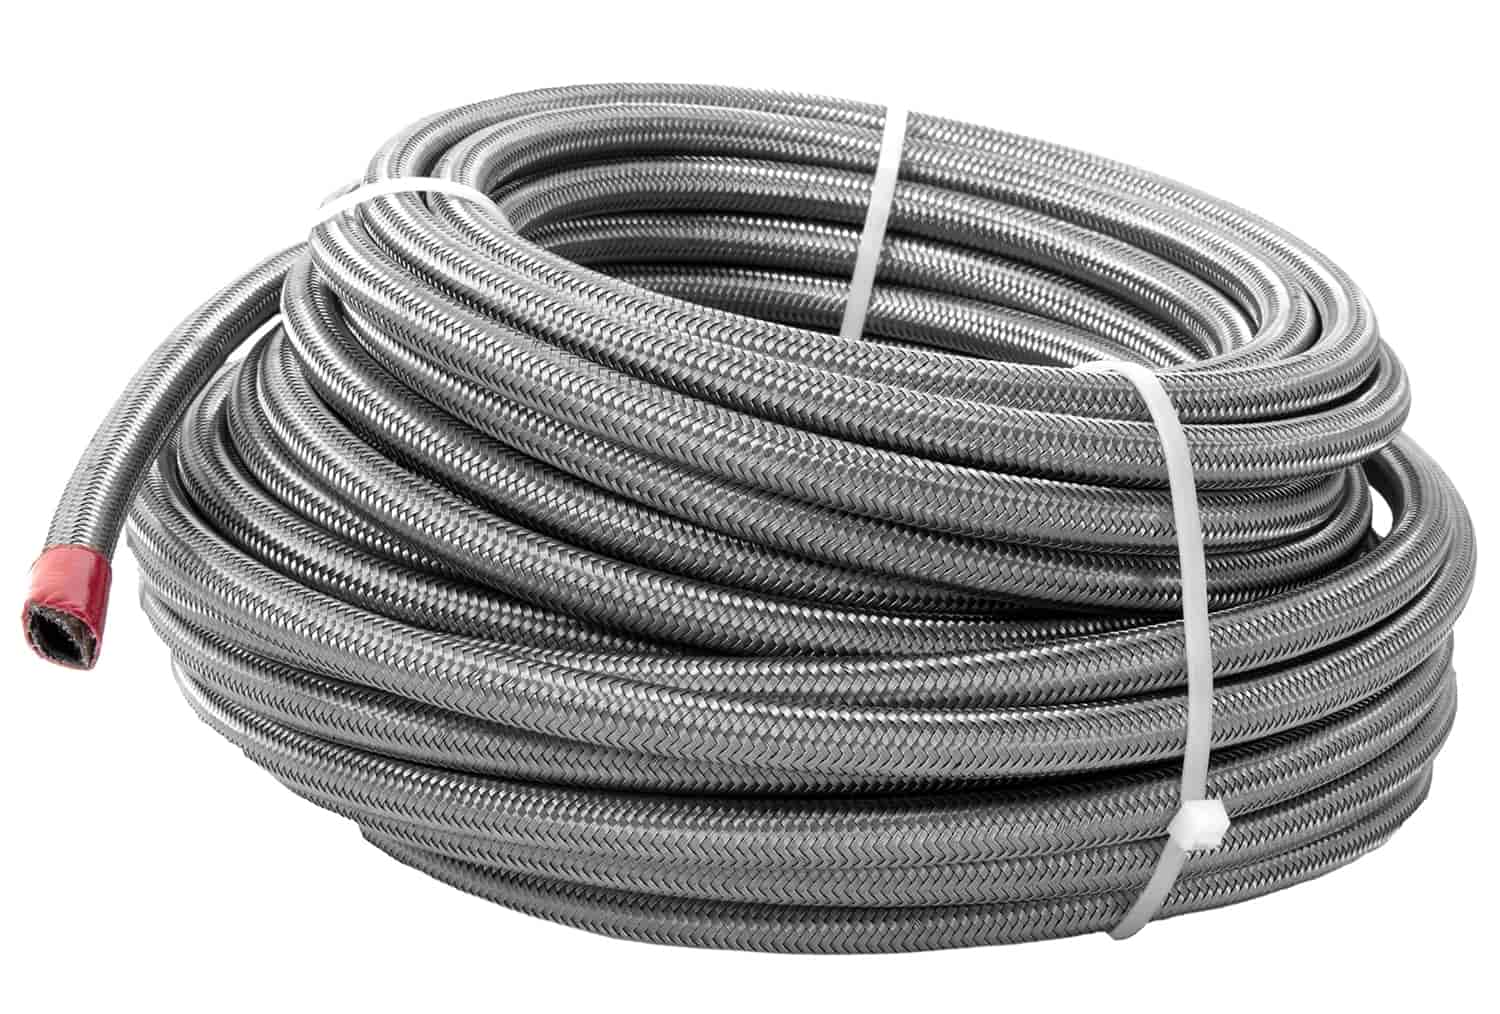 Braided Stainless Steel PTFE Fuel Hose -8 AN x 16 ft